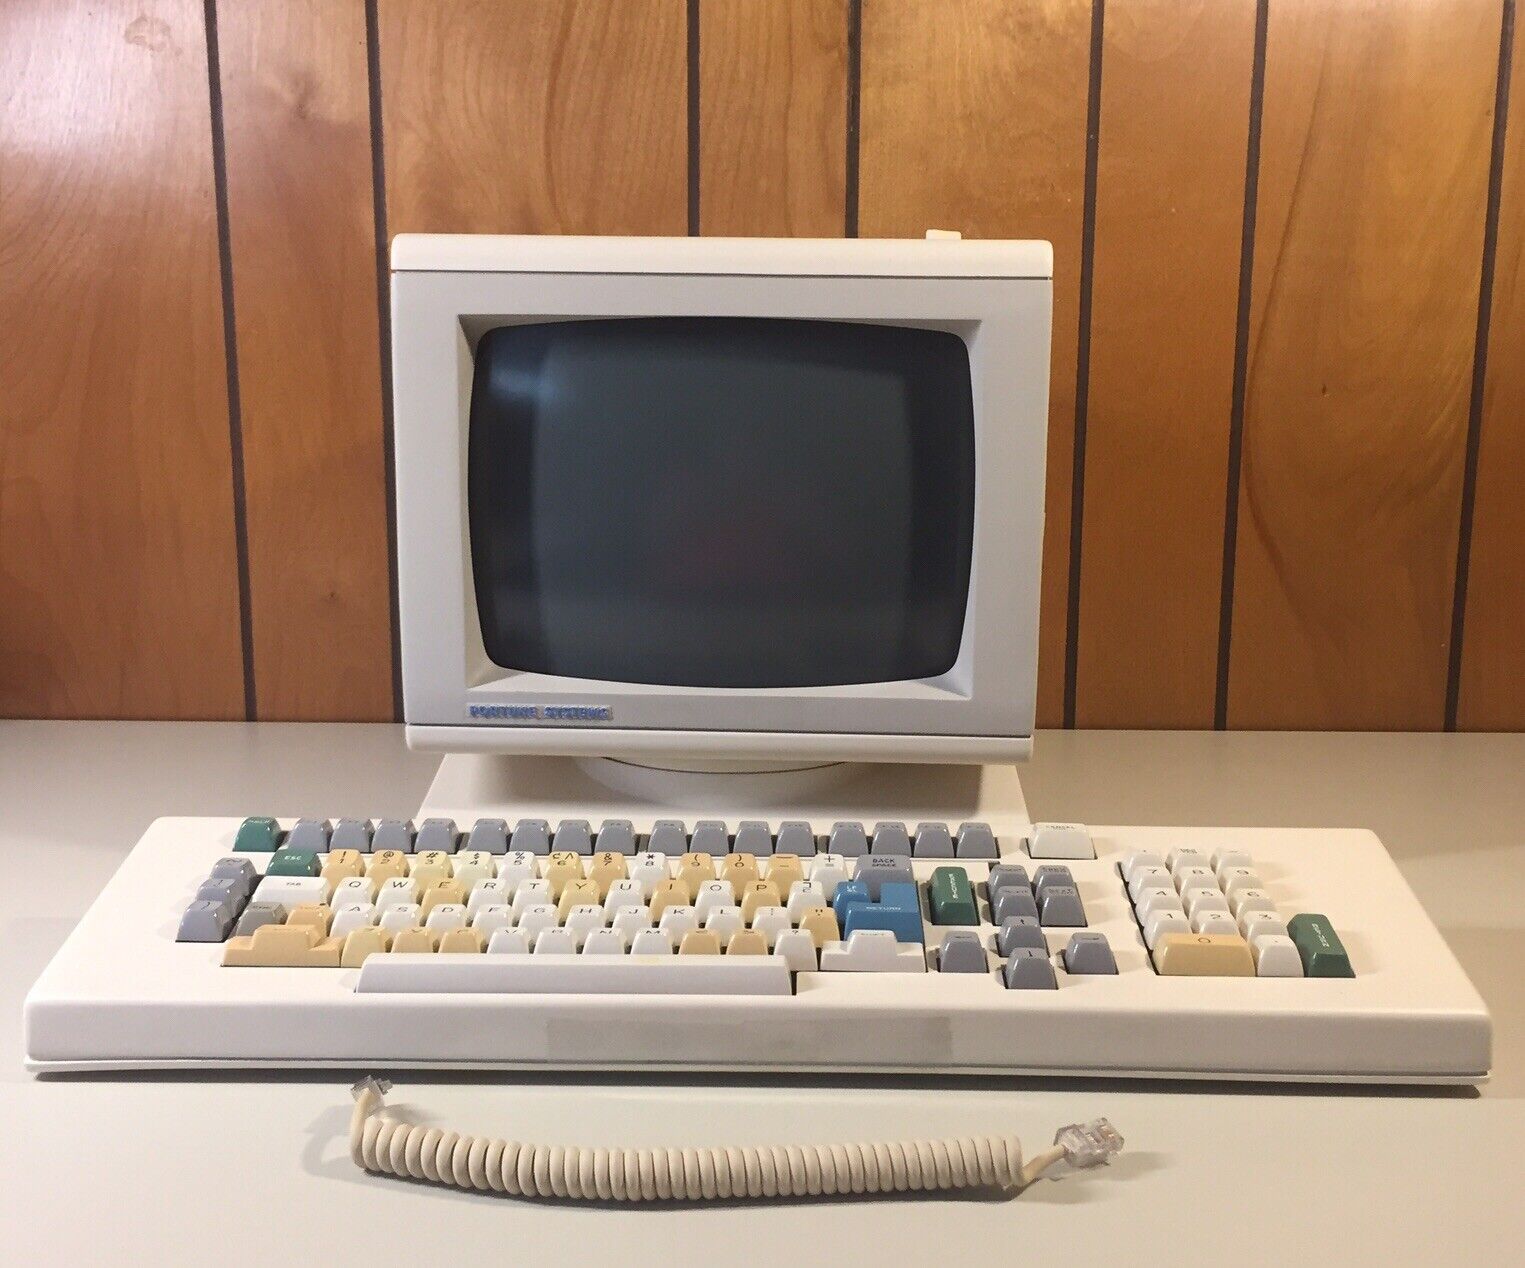 Vintage 1983 FORTUNE Systems Corp. Computer 32:16 Monitor/Keyboard RARE #2